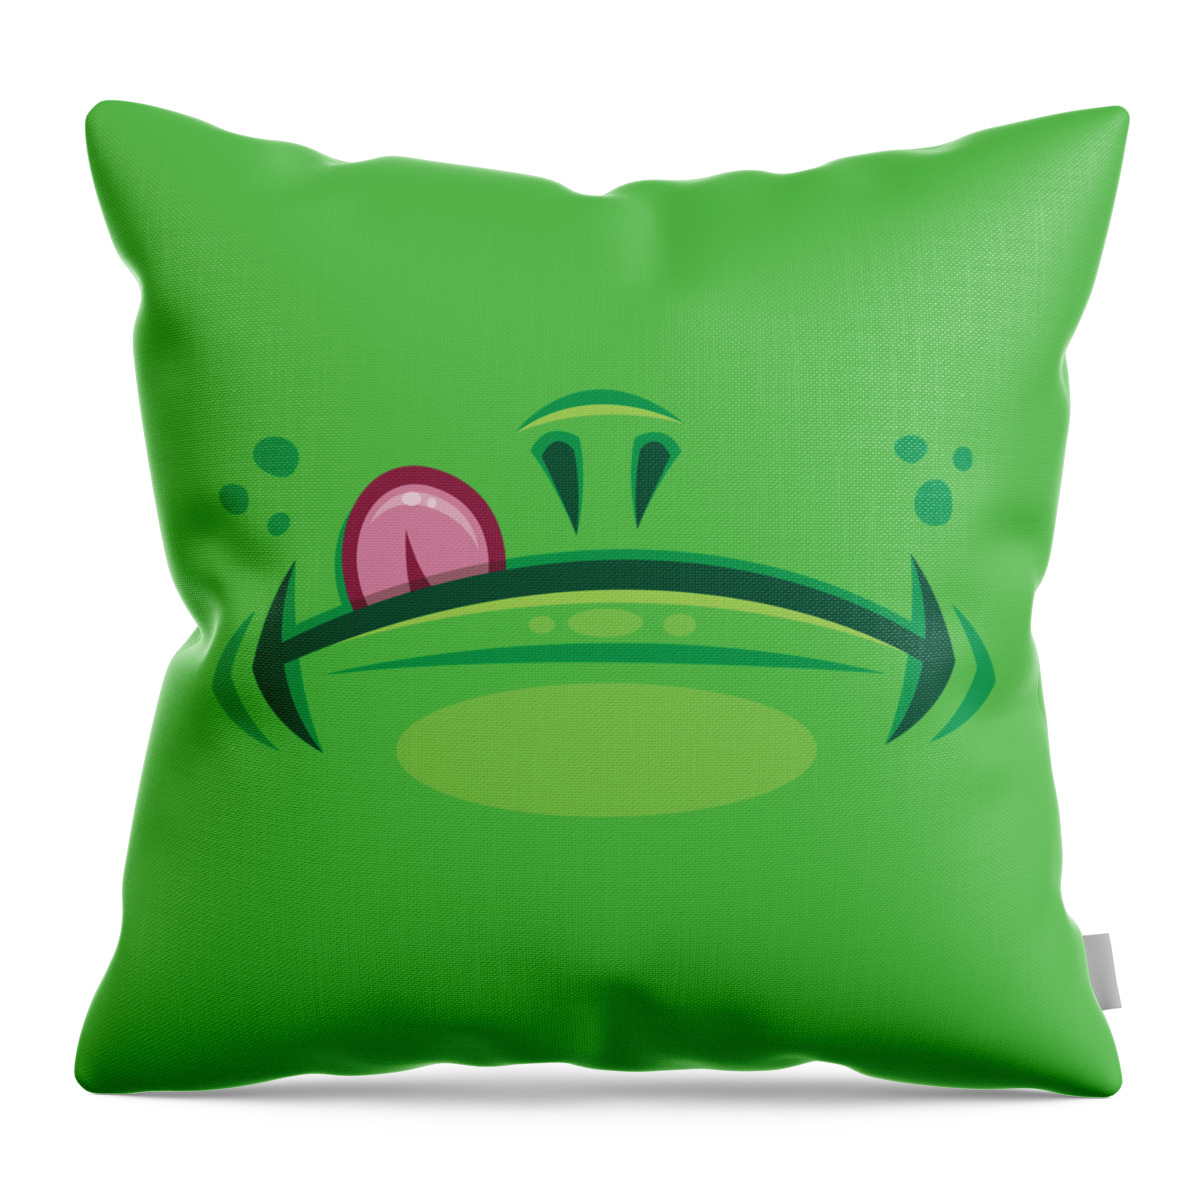 Frog Throw Pillow featuring the digital art Cartoon Frog Mouth with Tongue by John Schwegel